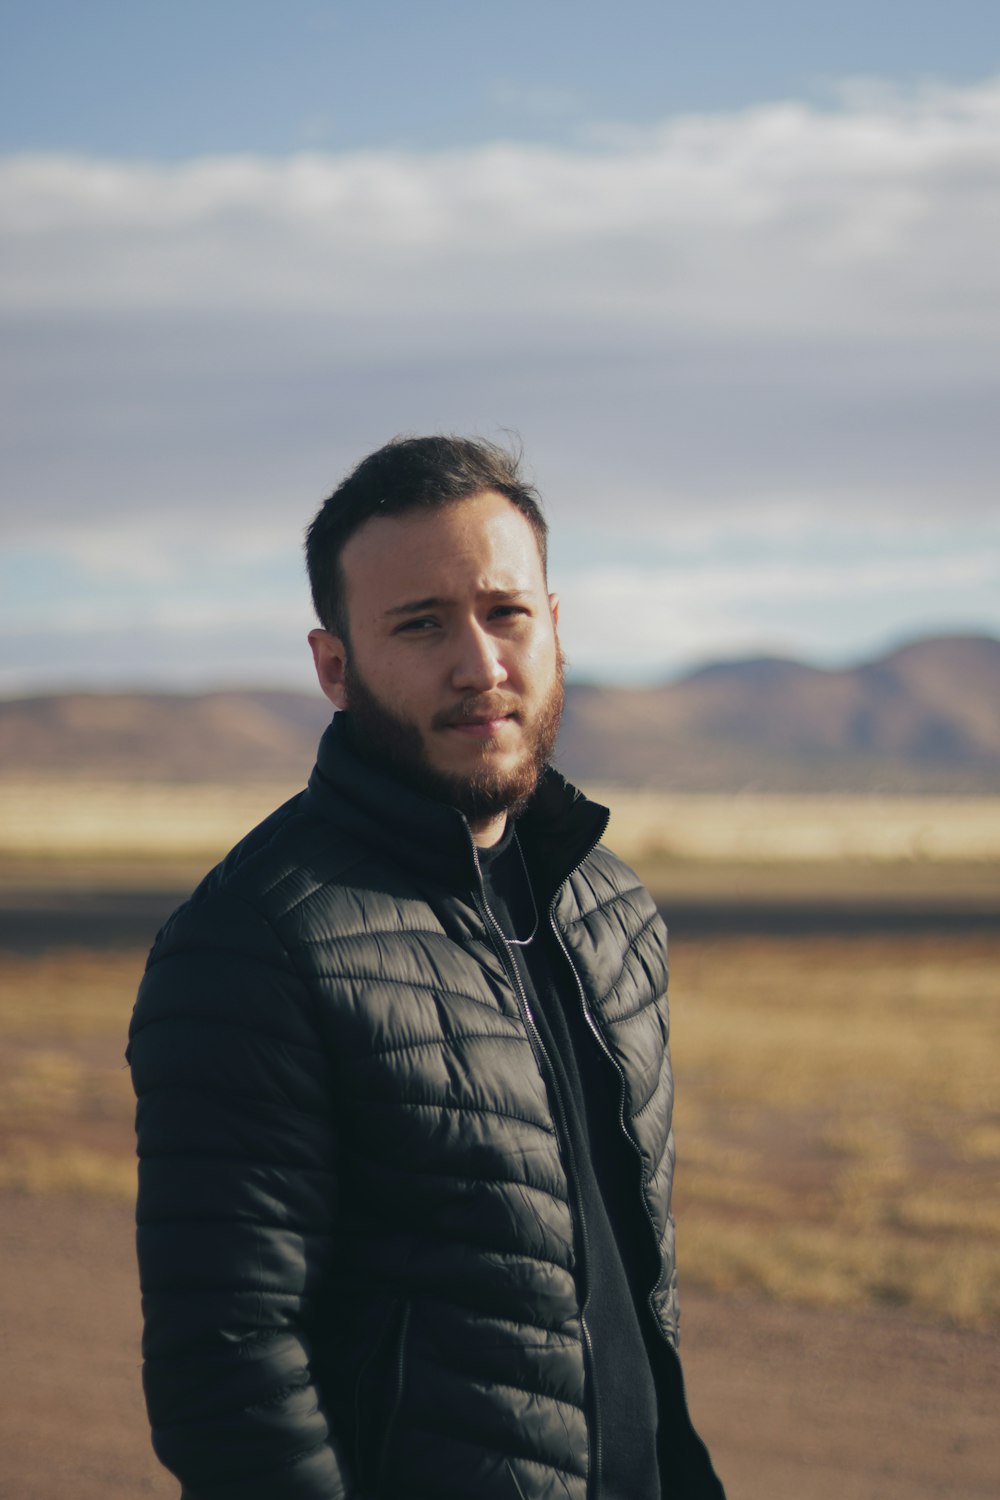 a man in a black jacket standing in a desert